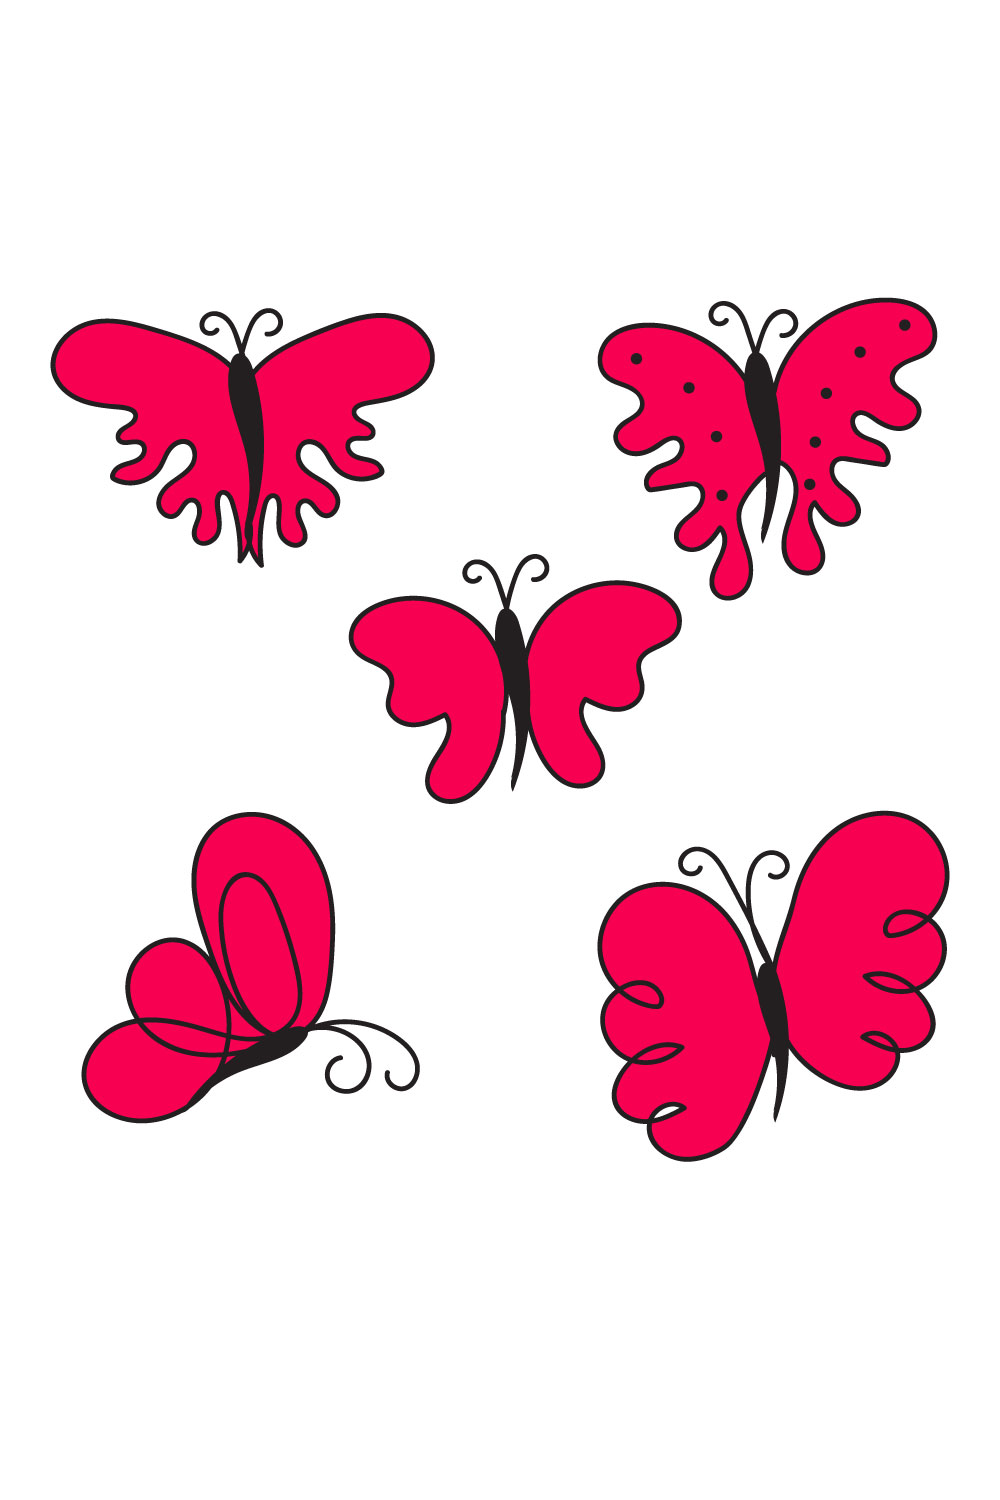 Set of four red butterflies on a white background.